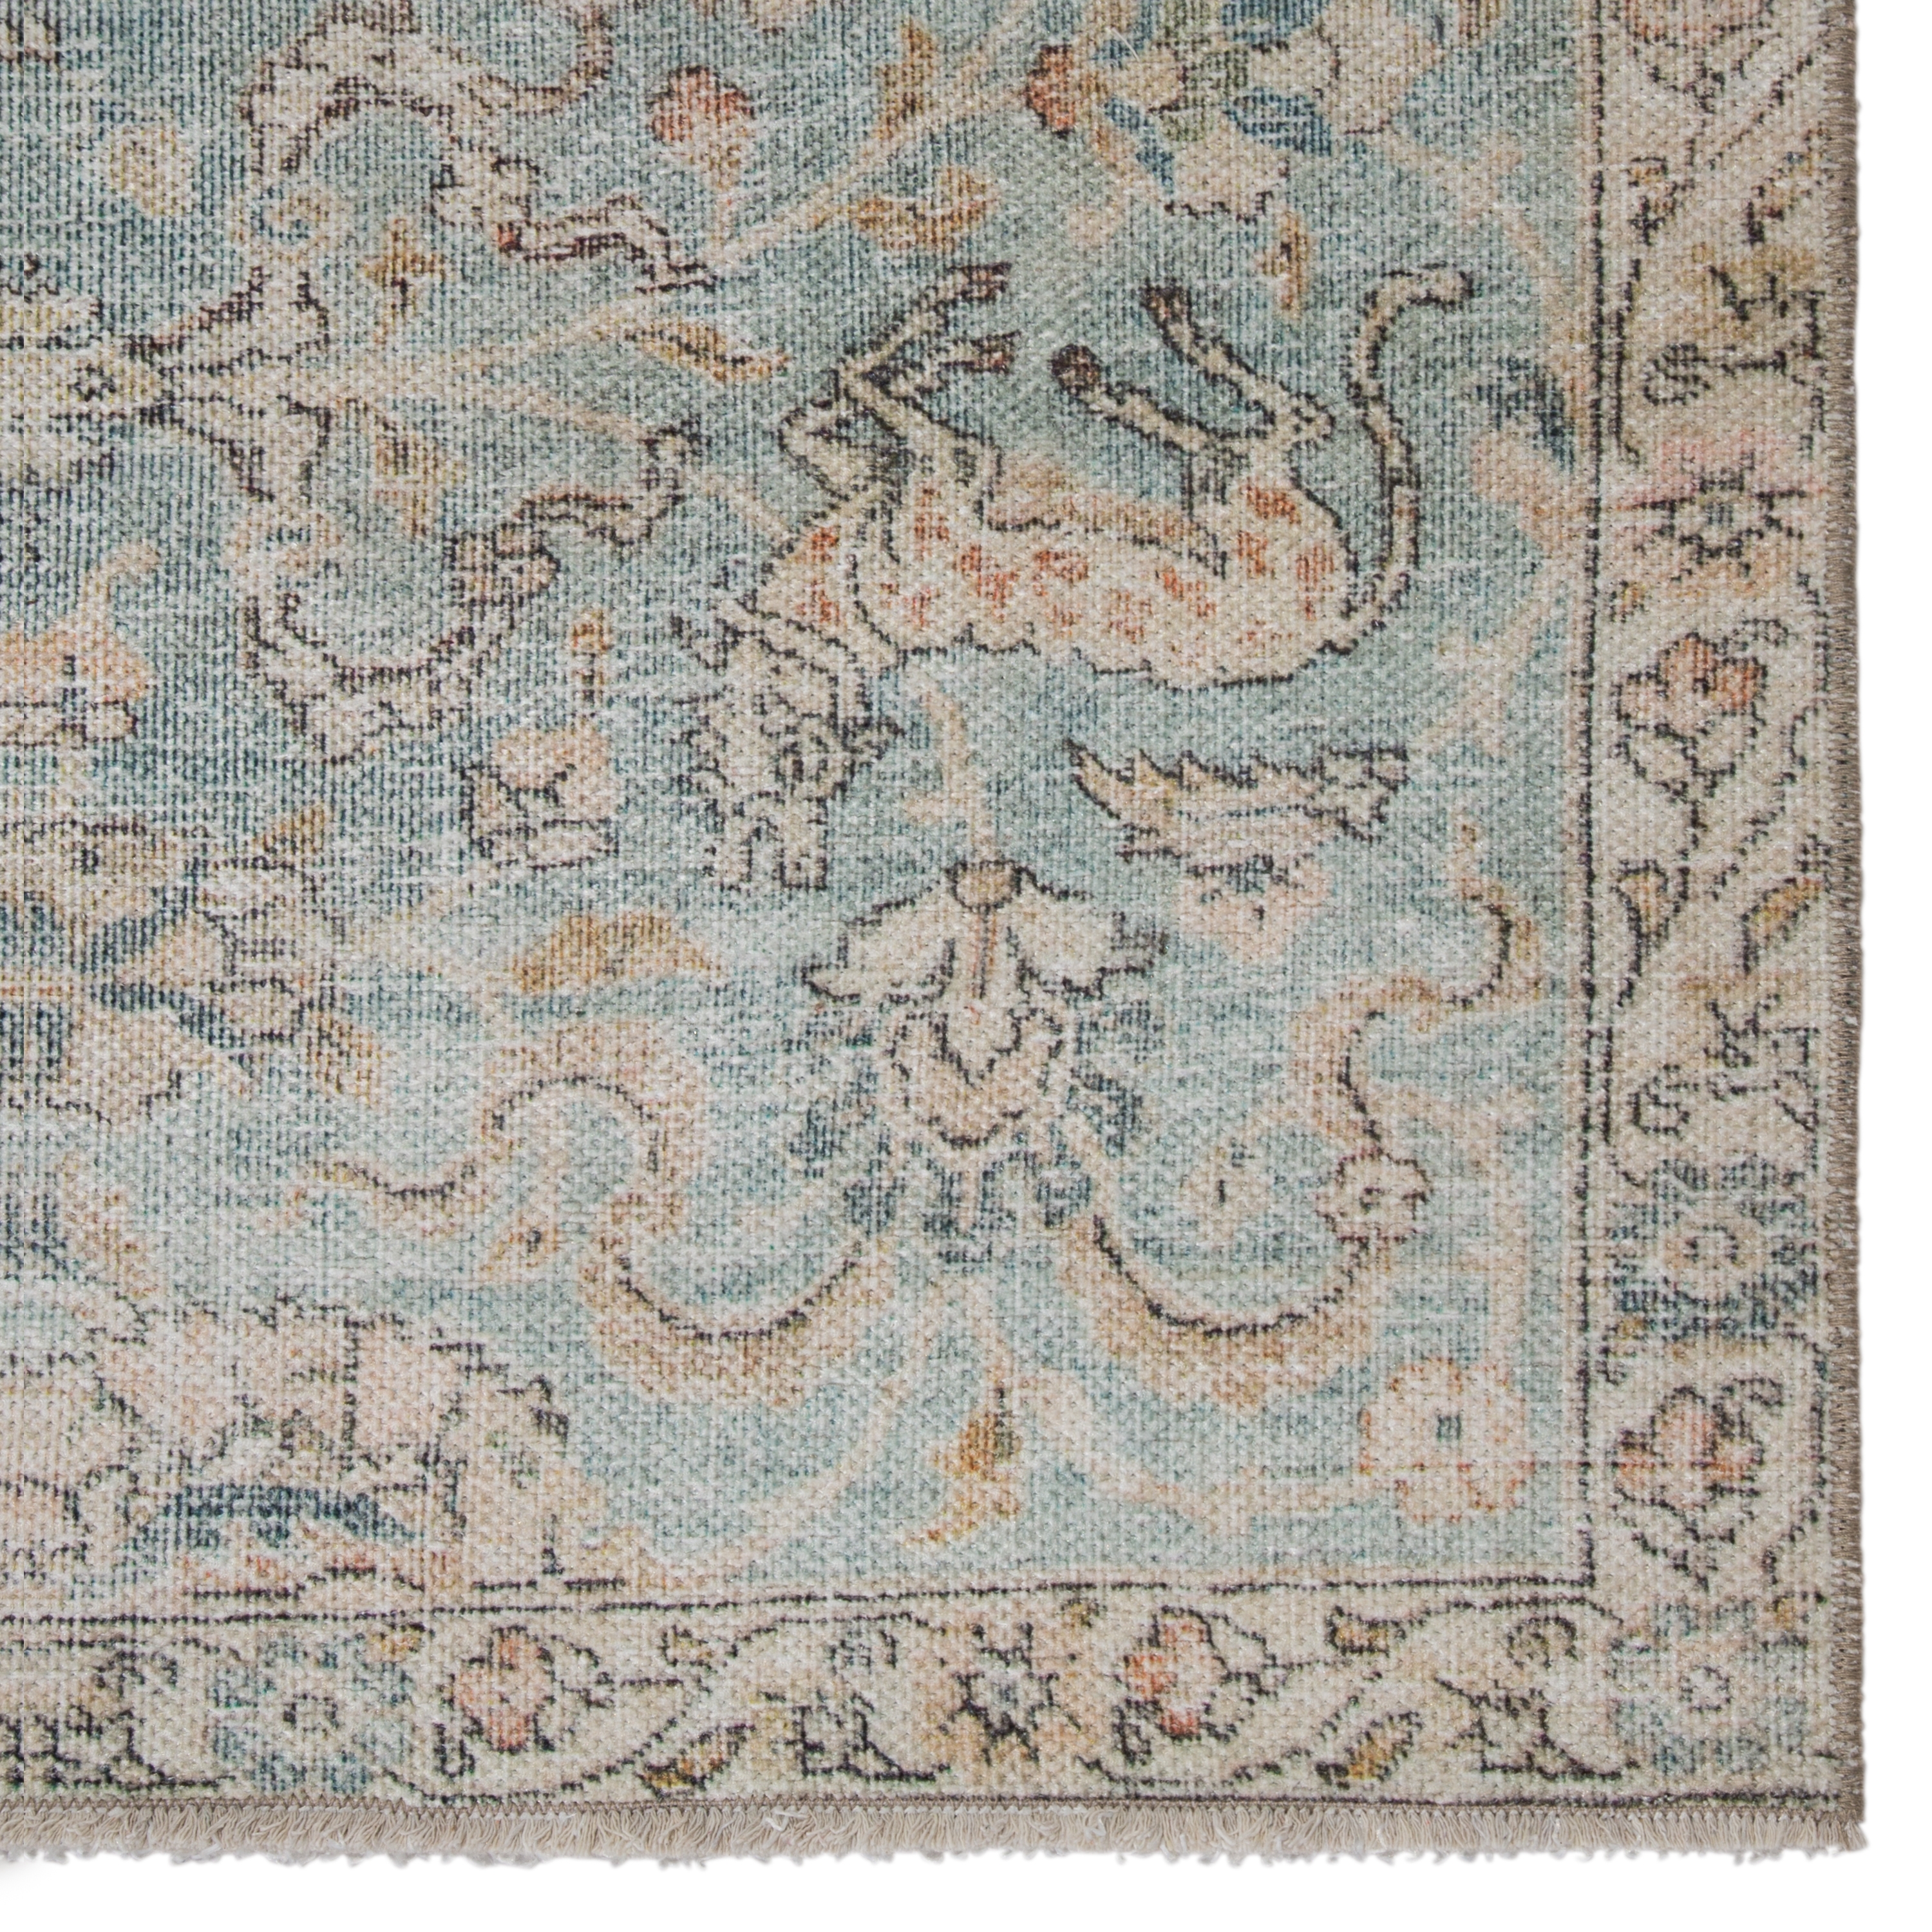 Stag Oriental Teal/ Gold Area Rug (6'X9') - Image 3